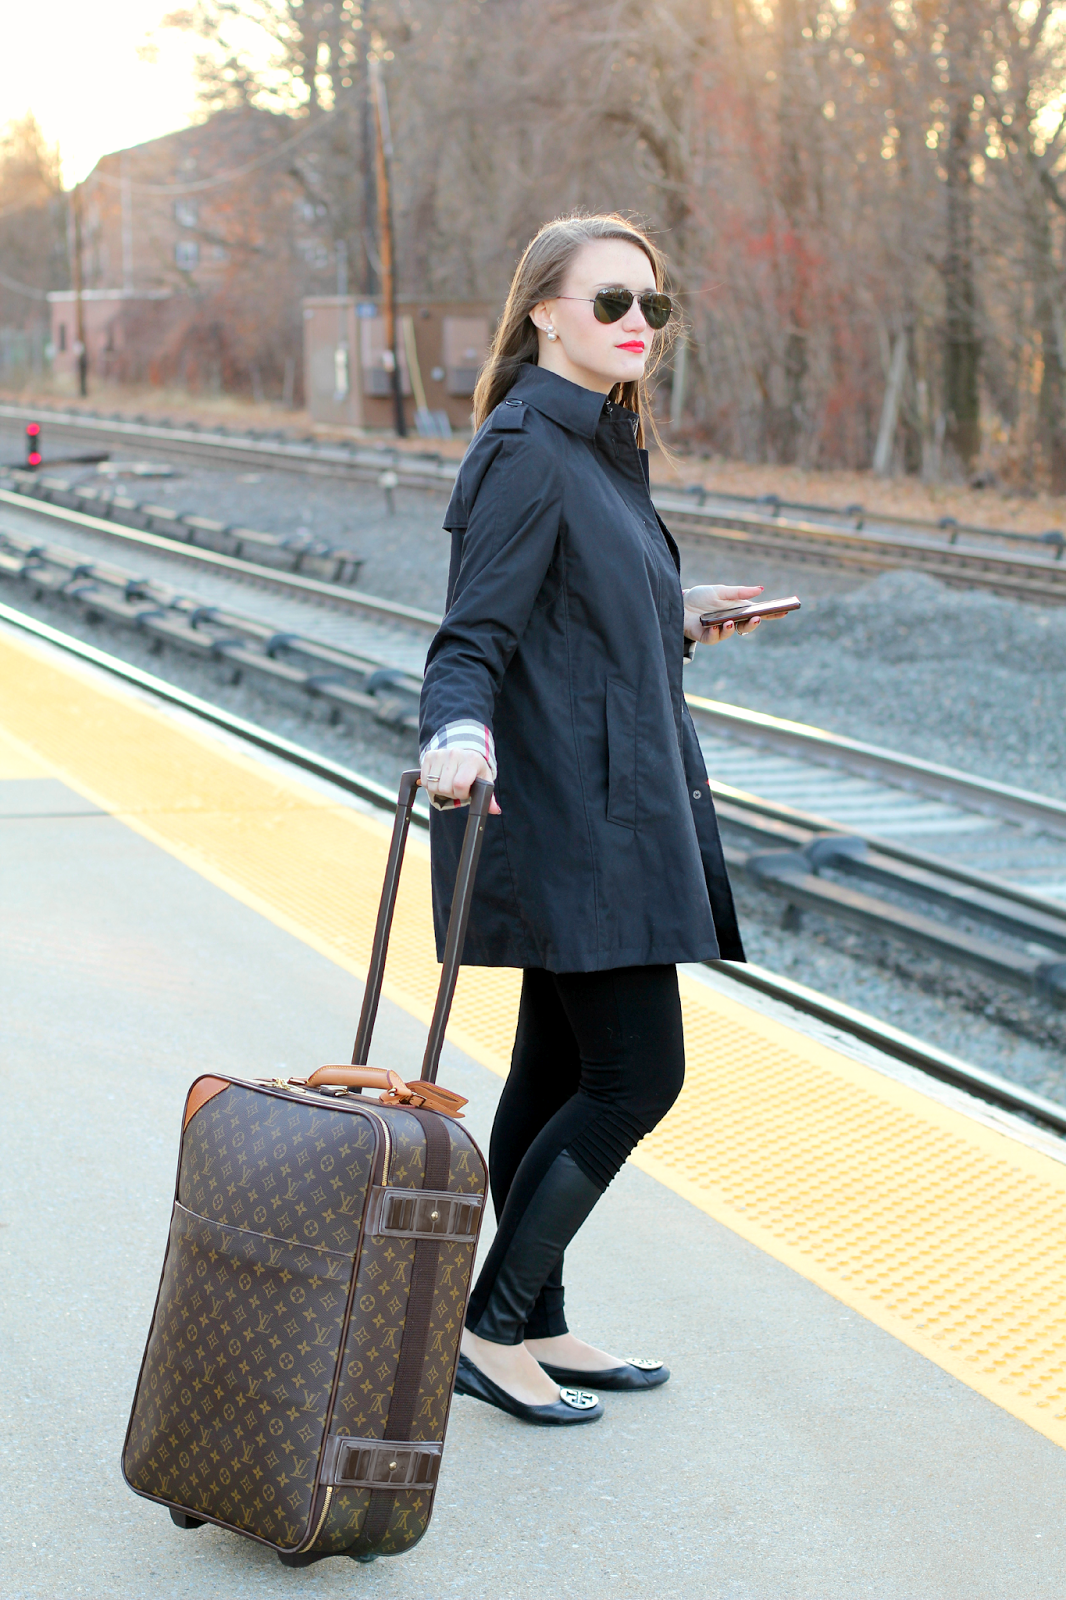 Travel Tuesday: Easy Travel Wear | New York City Fashion and Lifestyle